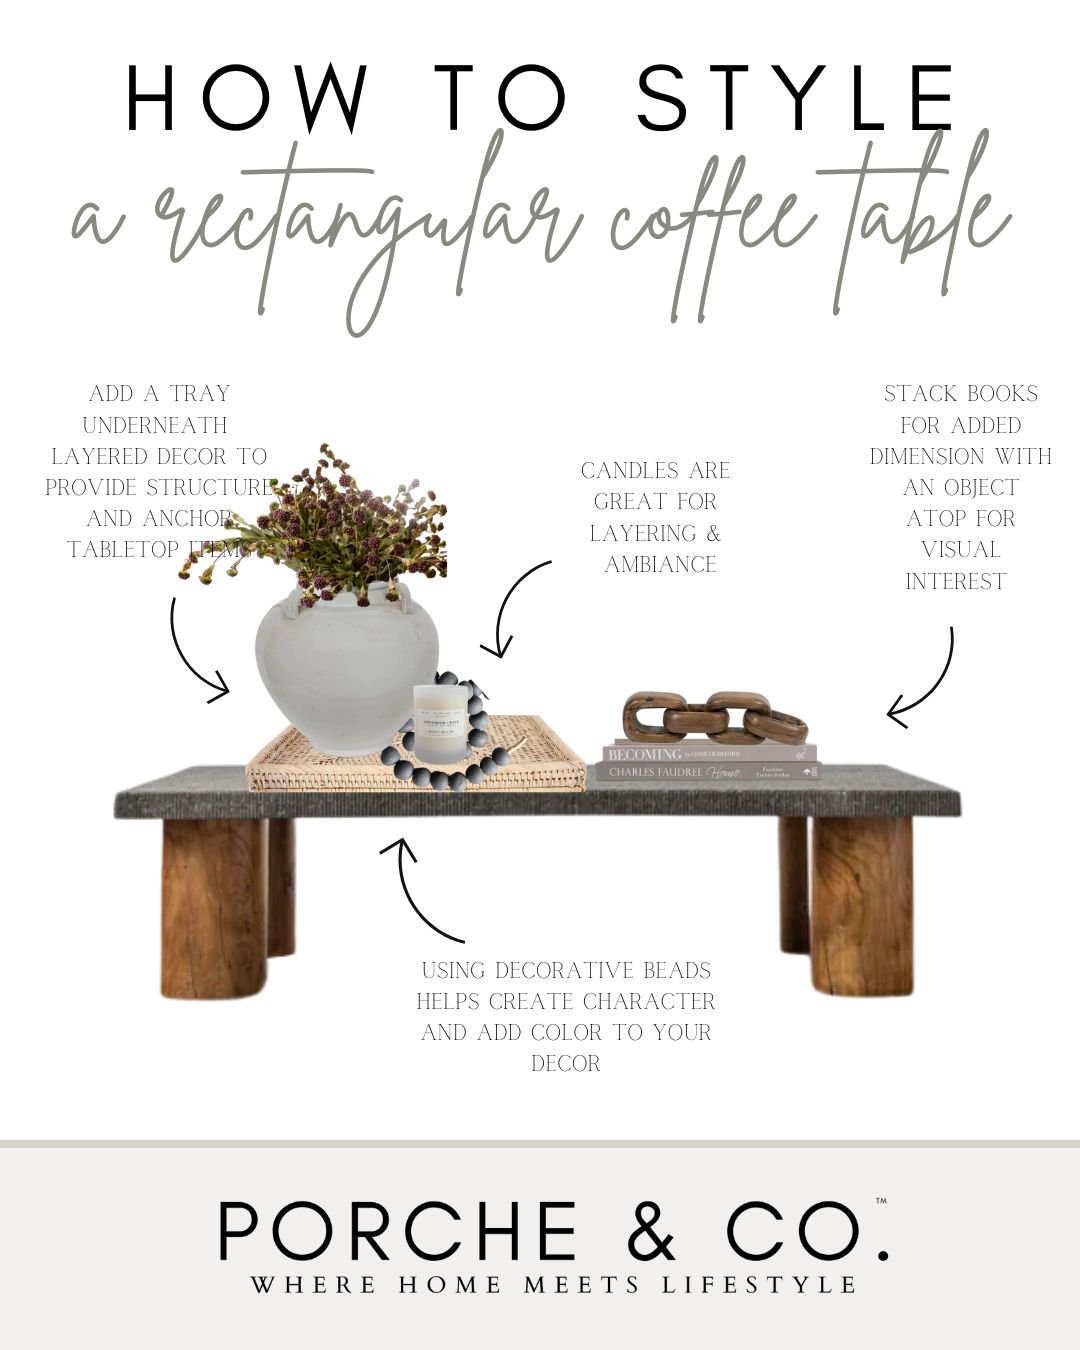 Make A Statement with Curated Coffee Table Books